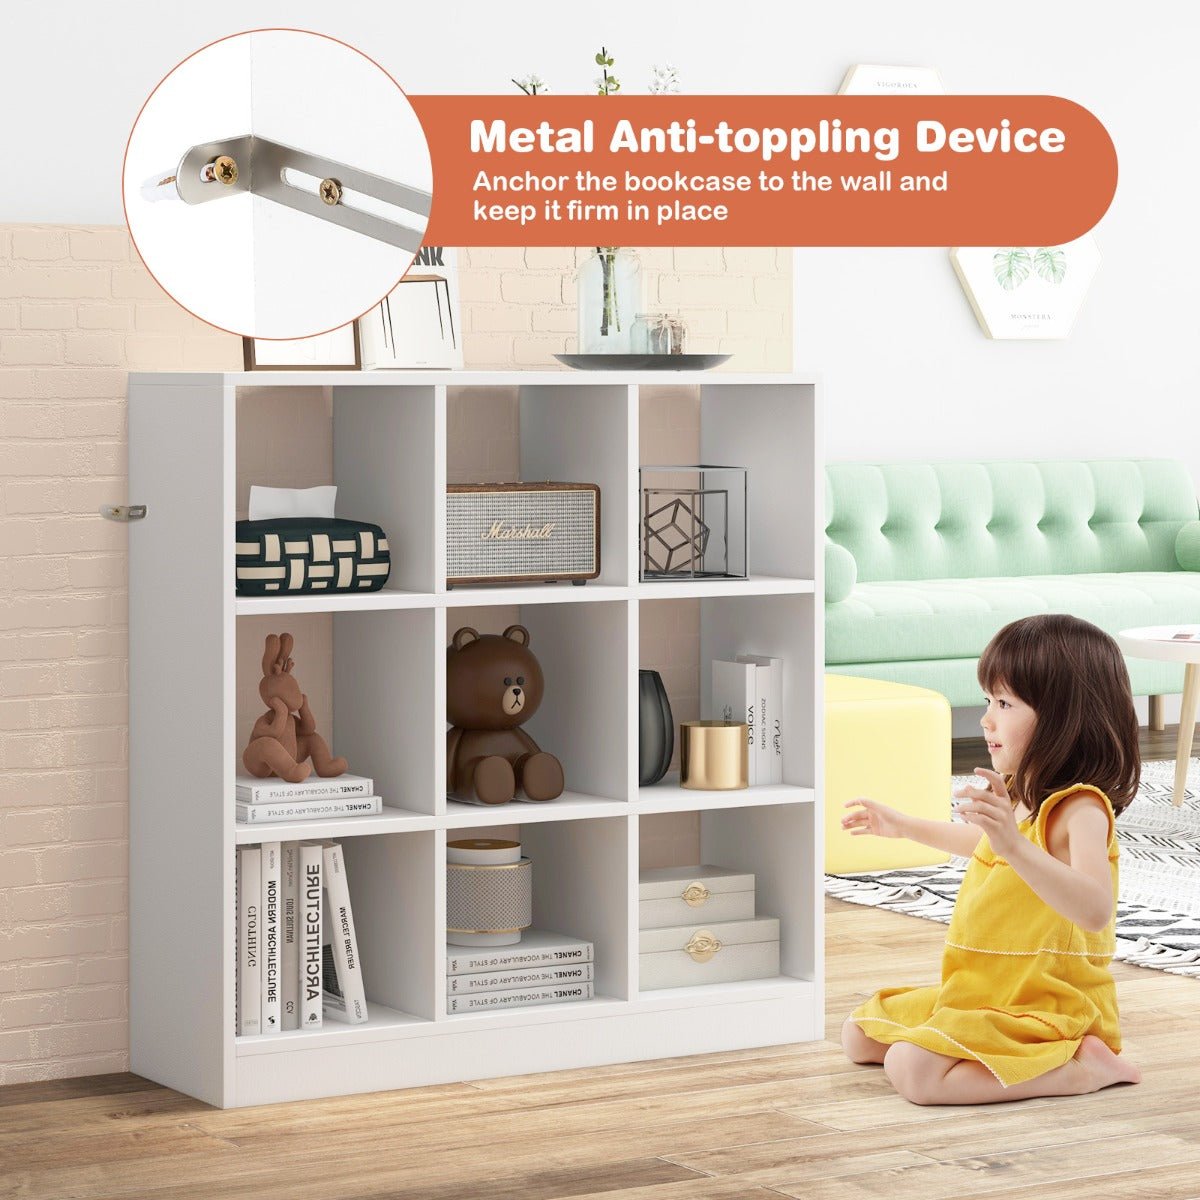 Kid's Room Organization - Toy Storage with Anti-toppling Device